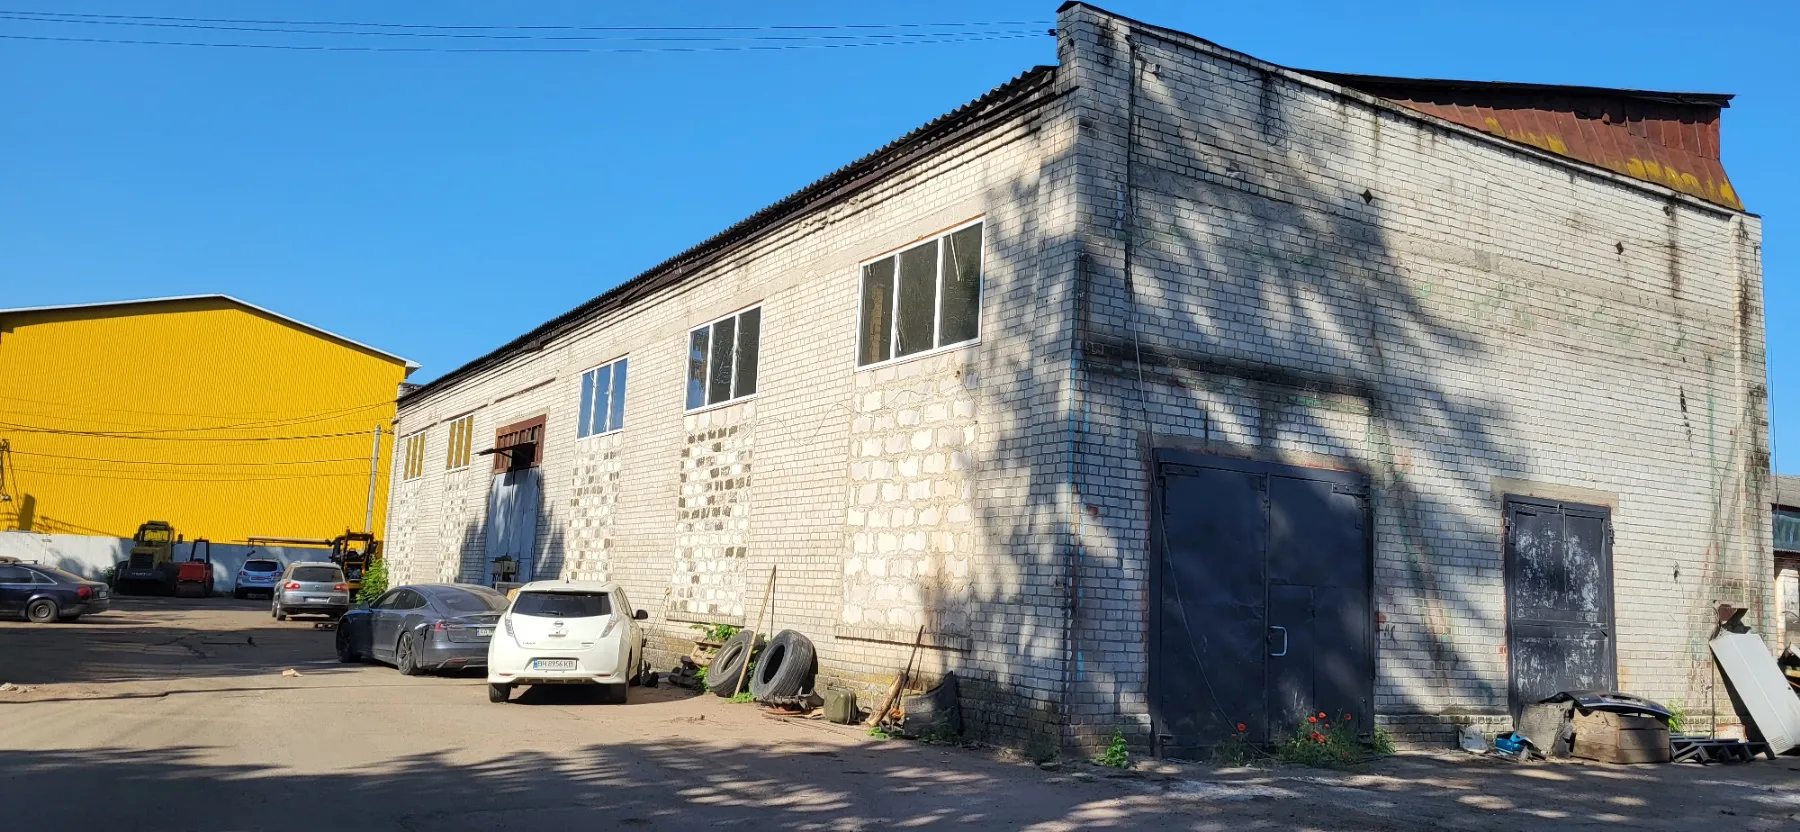 Real estate for sale for commercial purposes. 3 rooms, 1658 m², 1st floor. 15, Metalurhiv, Brovary. 